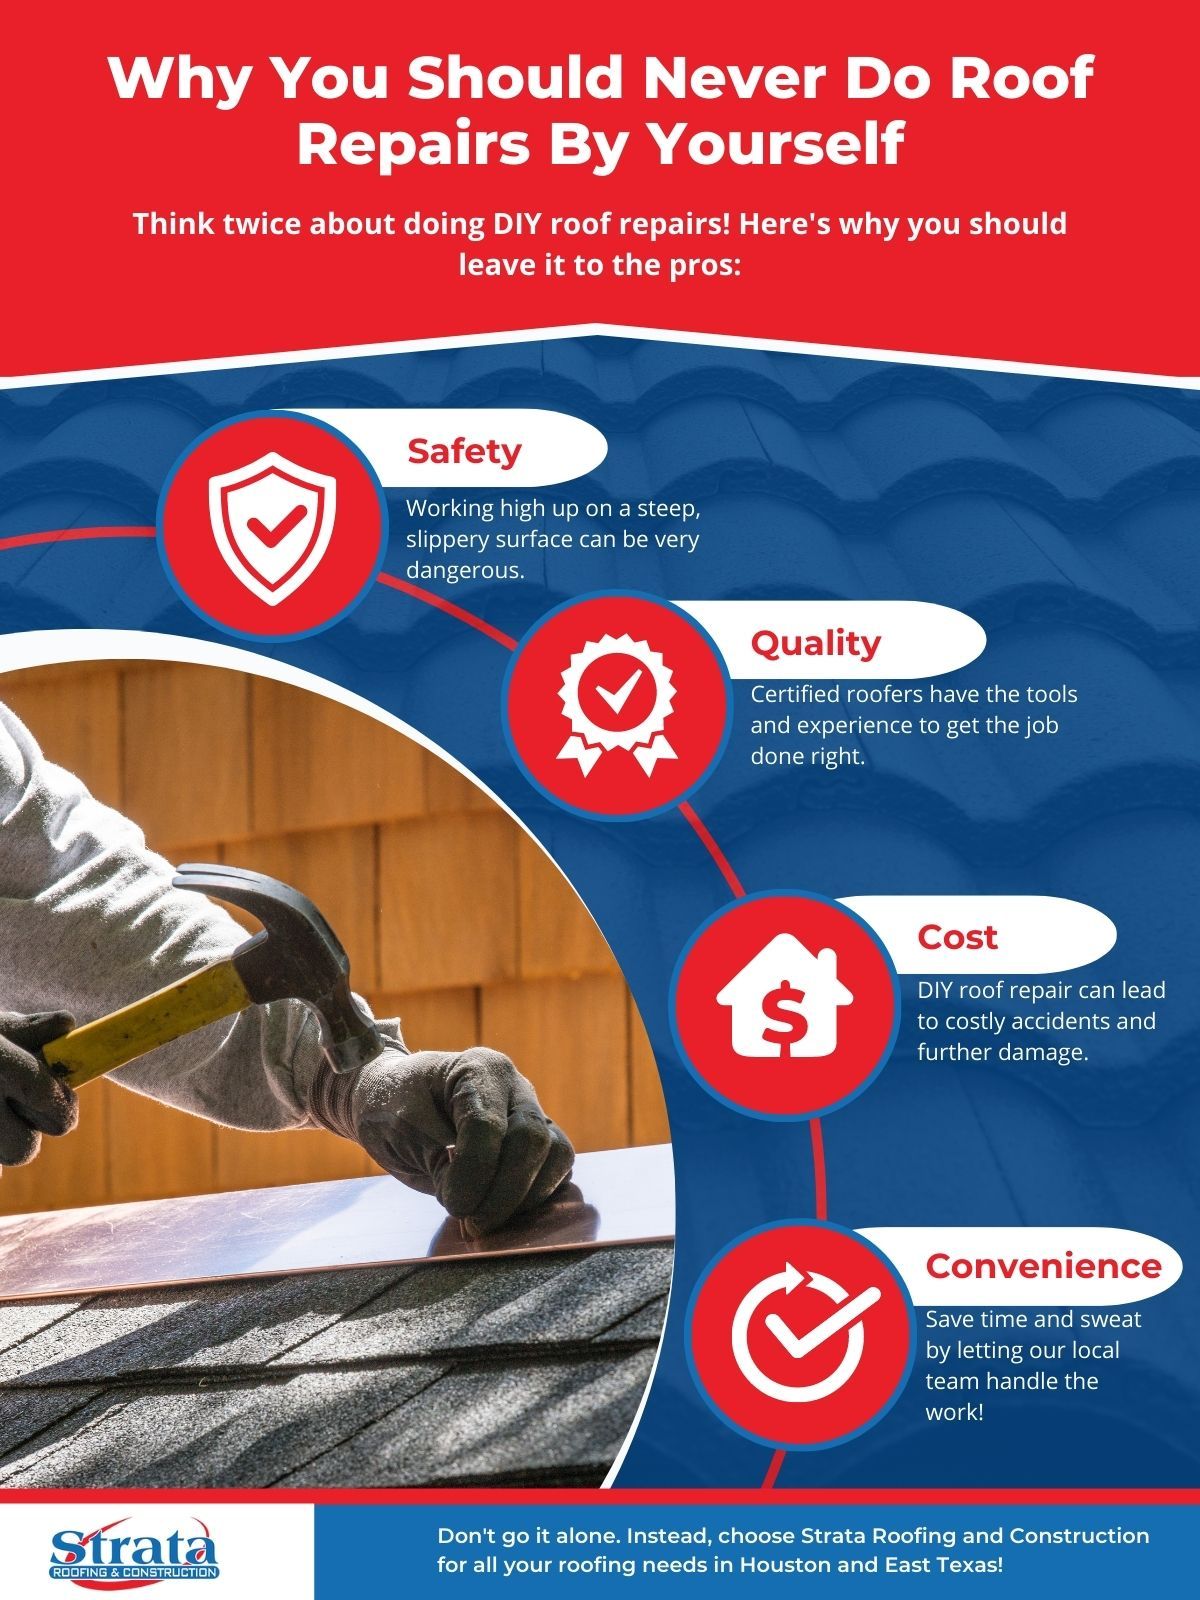 Why You Should Never Do Roof Repairs By Yourself Infographic .jpg